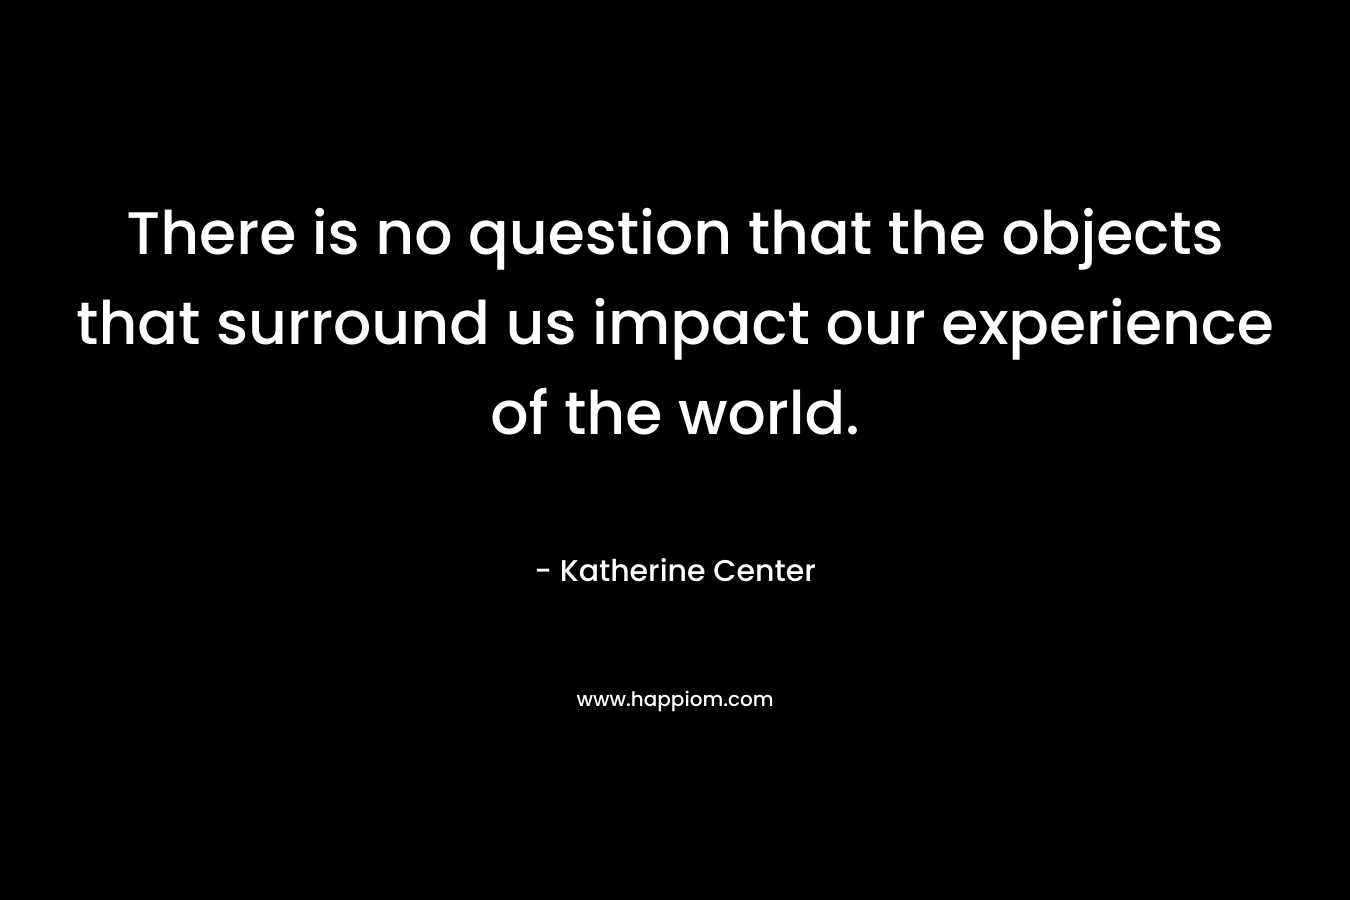 There is no question that the objects that surround us impact our experience of the world. – Katherine Center